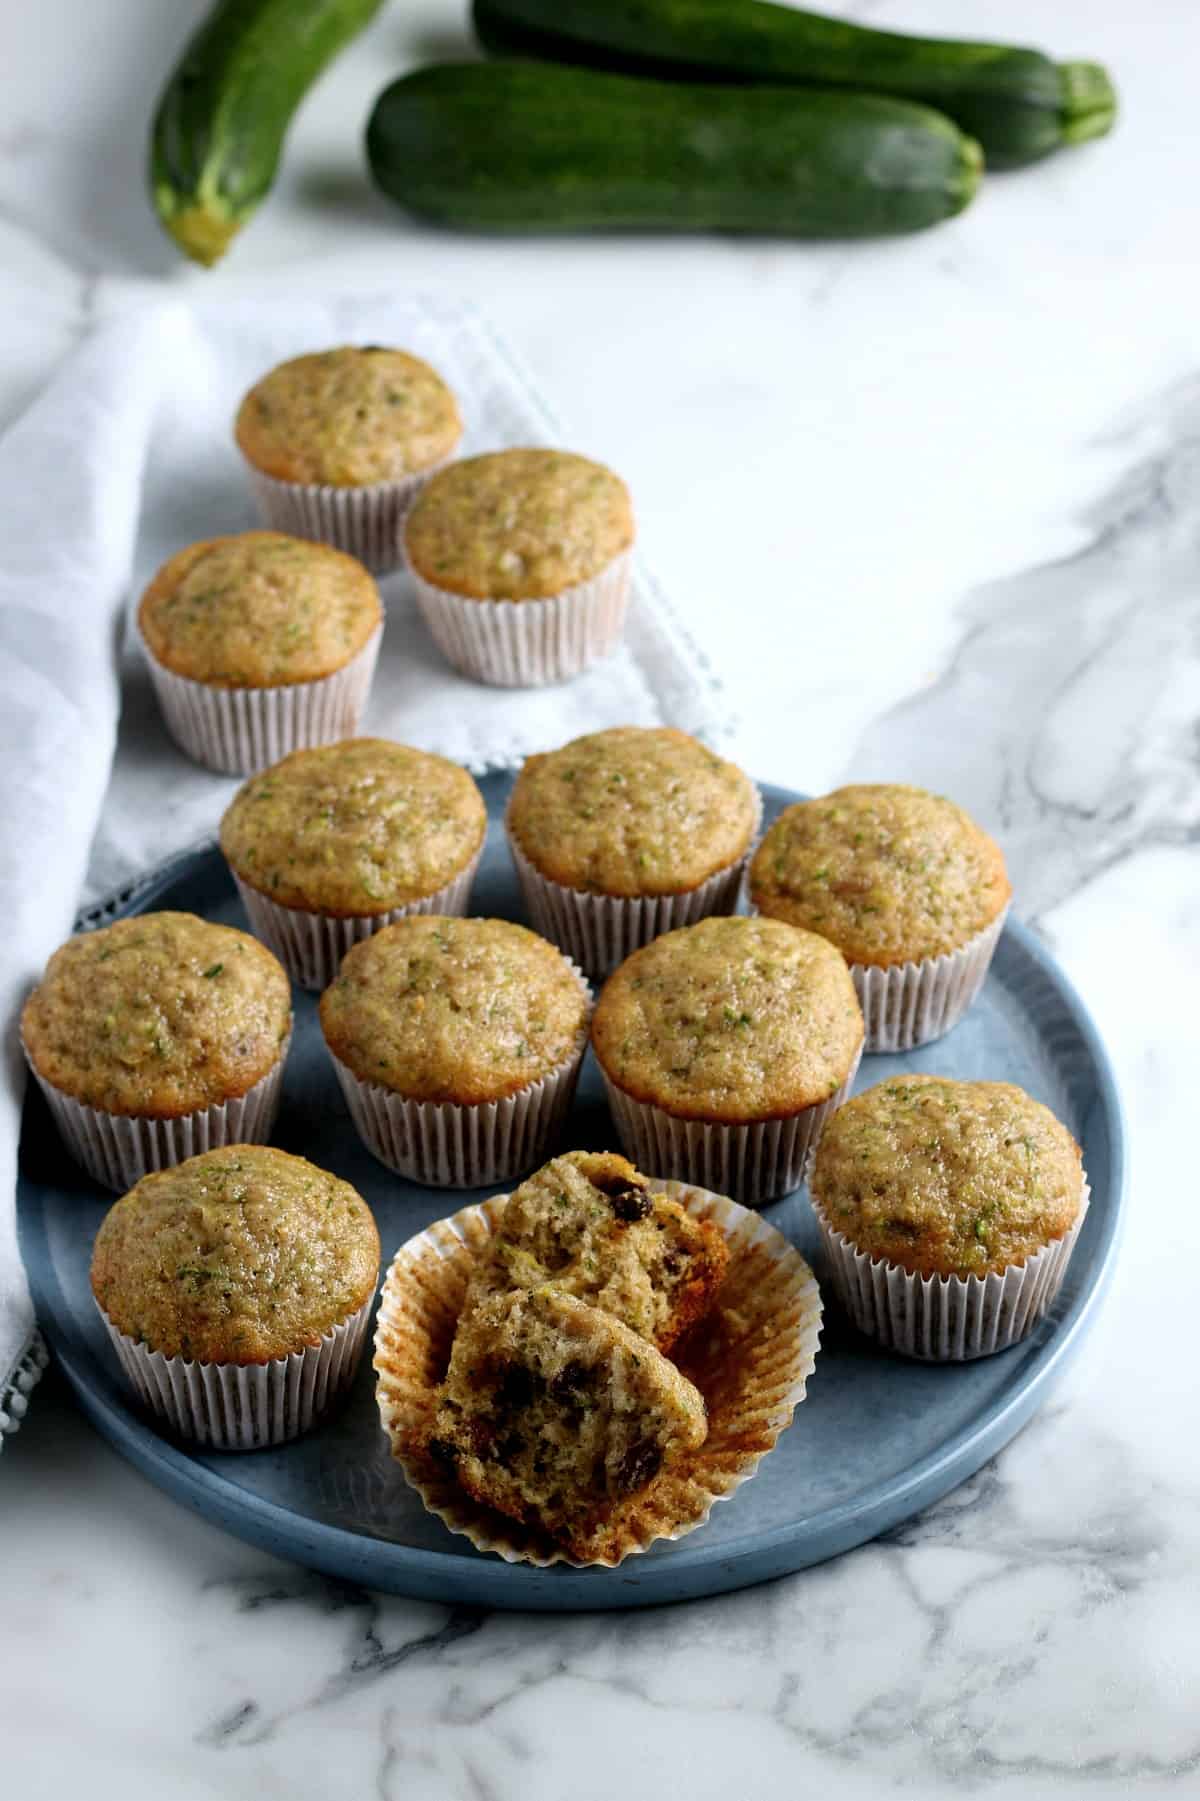 Twelve zucchini muffins on a tray and a white marble counter with the front muffin opened to see the moist insides.